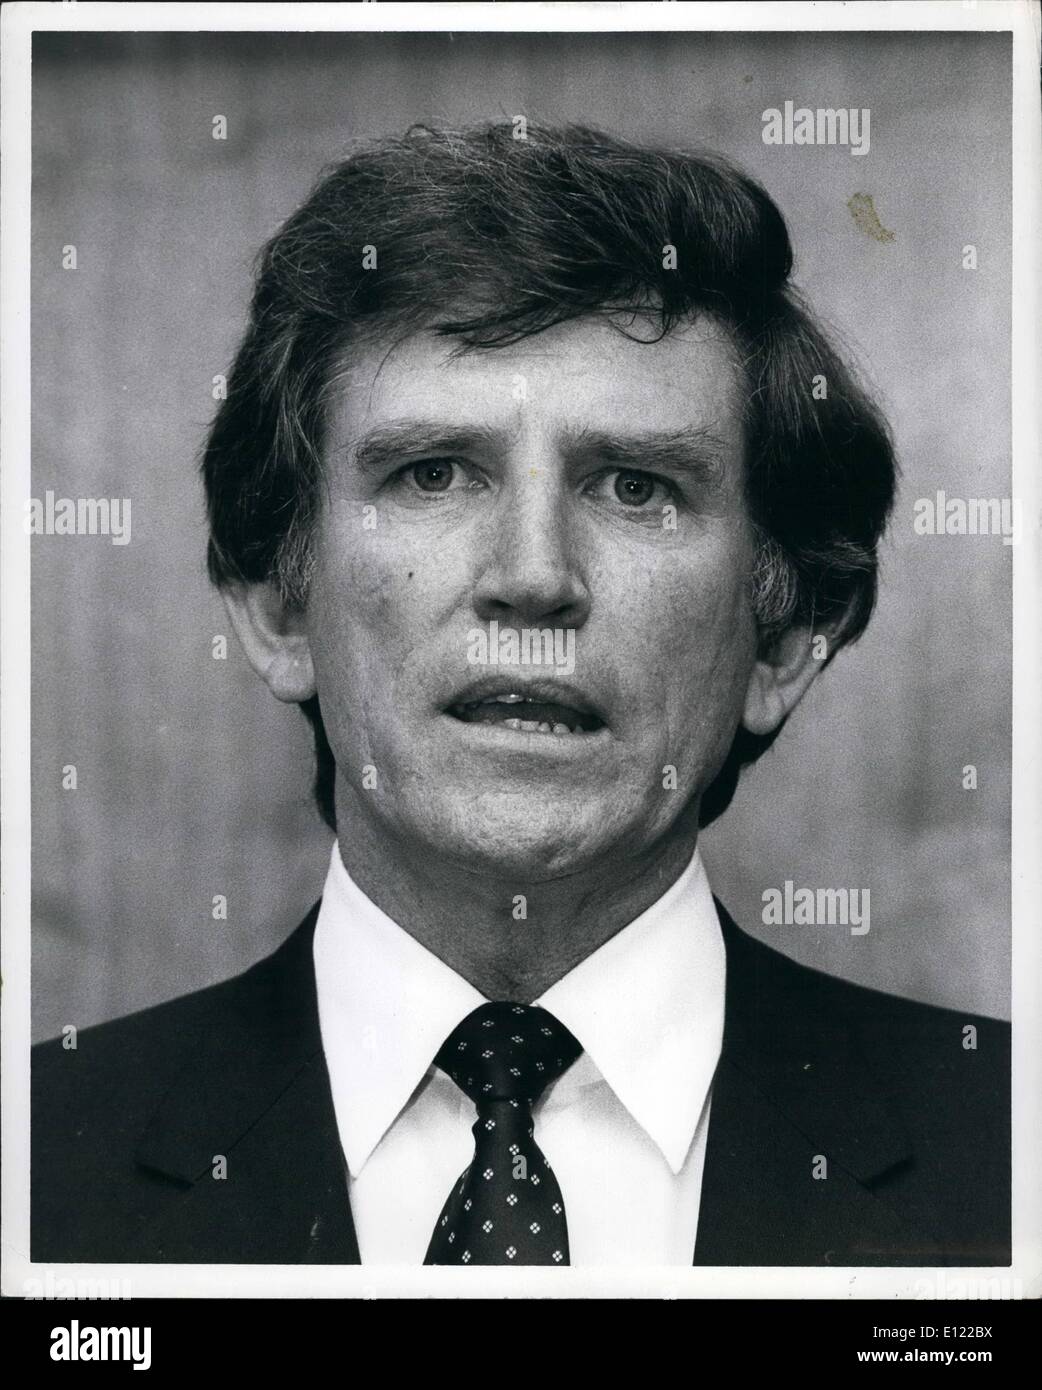 Jun. 06, 1983 - United States Senator, Gary Hart, Democrat From Colorado Held A News Conference In New York City Today At The New York Hilton Hotel In New York City. Mr. Hart Called The News conference To Discuss The Economic Equity Act Which Is Pending In Congress. Mr. Hart Who Is A Declared Candidate For The Democratic Presidential Nomination Is The Chief Democratic Sponsor Of This Bill Which Would Guarantee Women Equal Pay In The Workforce. Stock Photo